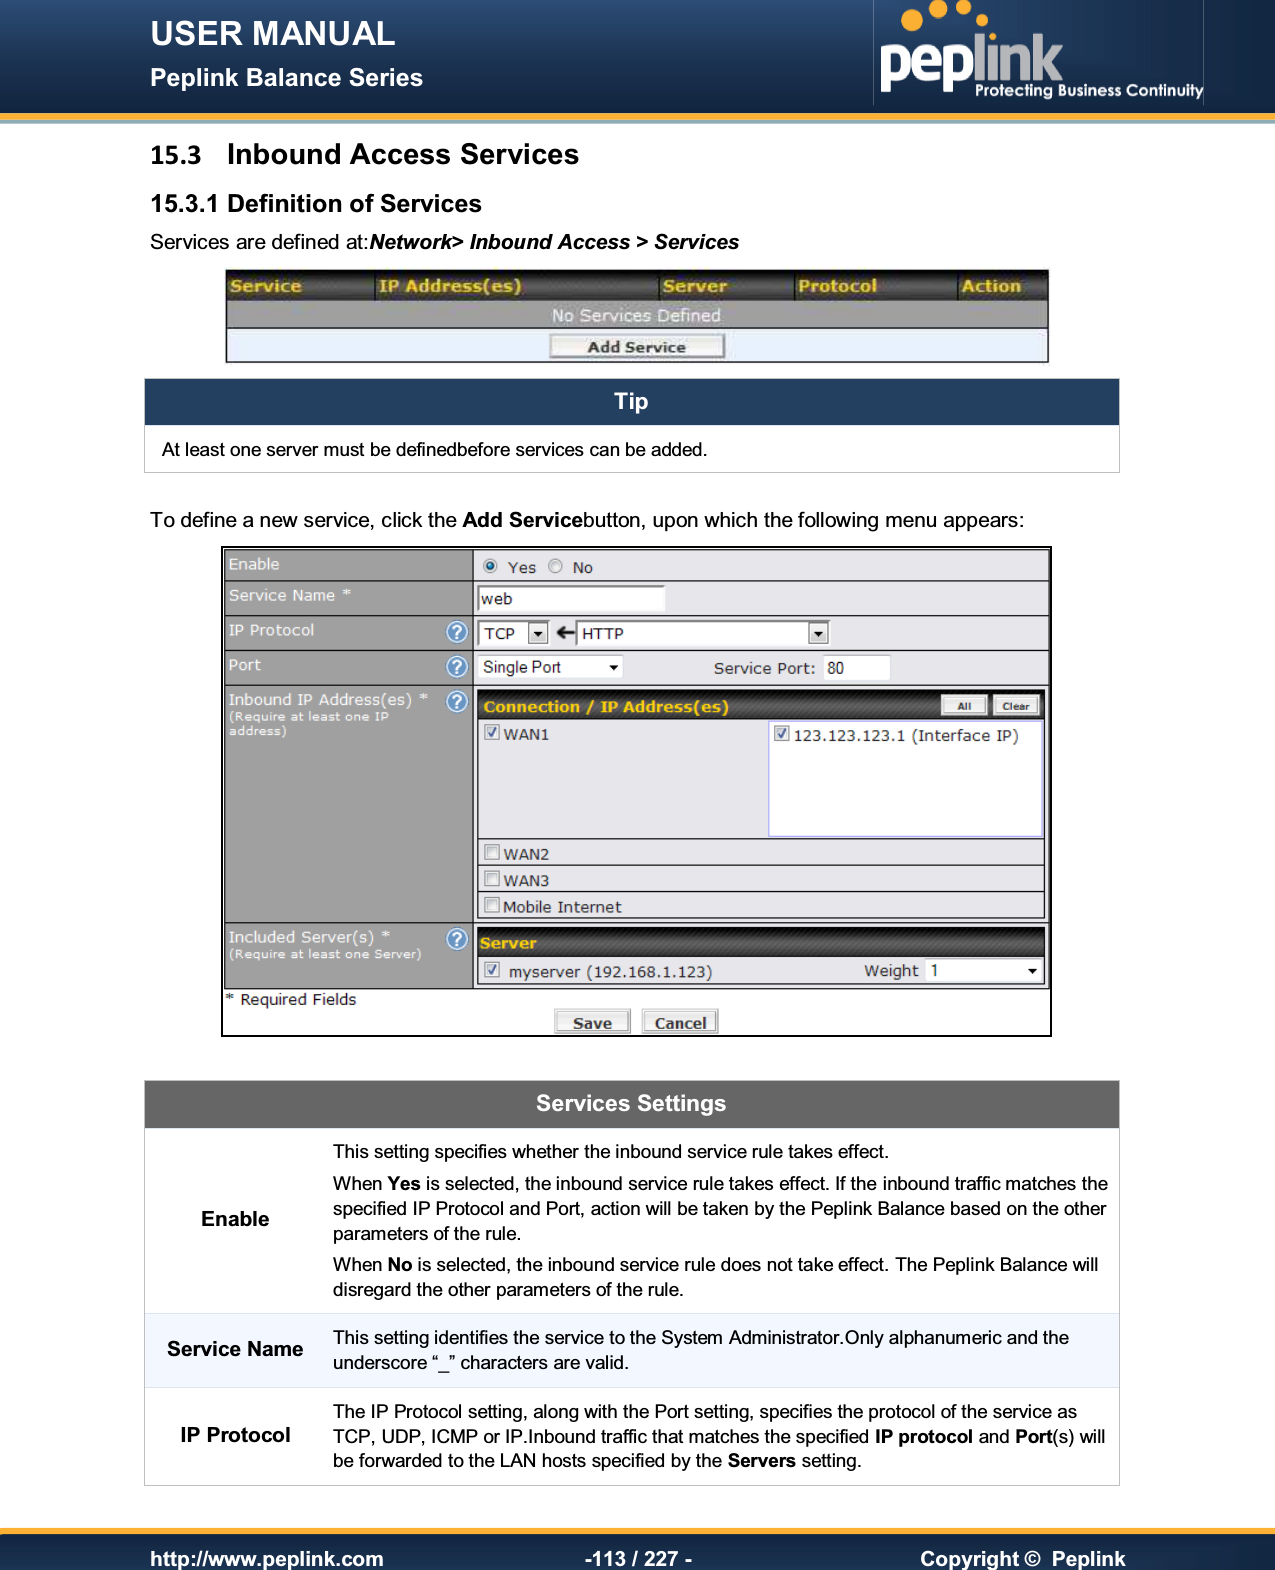 USER MANUAL Peplink Balance Series   http://www.peplink.com -113 / 227 -  Copyright ©  Peplink 15.3  Inbound Access Services 15.3.1 Definition of Services Services are defined at:Network&gt; Inbound Access &gt; Services  Tip At least one server must be definedbefore services can be added.  To define a new service, click the Add Servicebutton, upon which the following menu appears:   Services Settings Enable This setting specifies whether the inbound service rule takes effect. When Yes is selected, the inbound service rule takes effect. If the inbound traffic matches the specified IP Protocol and Port, action will be taken by the Peplink Balance based on the other parameters of the rule. When No is selected, the inbound service rule does not take effect. The Peplink Balance will disregard the other parameters of the rule. Service Name This setting identifies the service to the System Administrator.Only alphanumeric and the underscore “_” characters are valid. IP Protocol The IP Protocol setting, along with the Port setting, specifies the protocol of the service as TCP, UDP, ICMP or IP.Inbound traffic that matches the specified IP protocol and Port(s) will be forwarded to the LAN hosts specified by the Servers setting.   